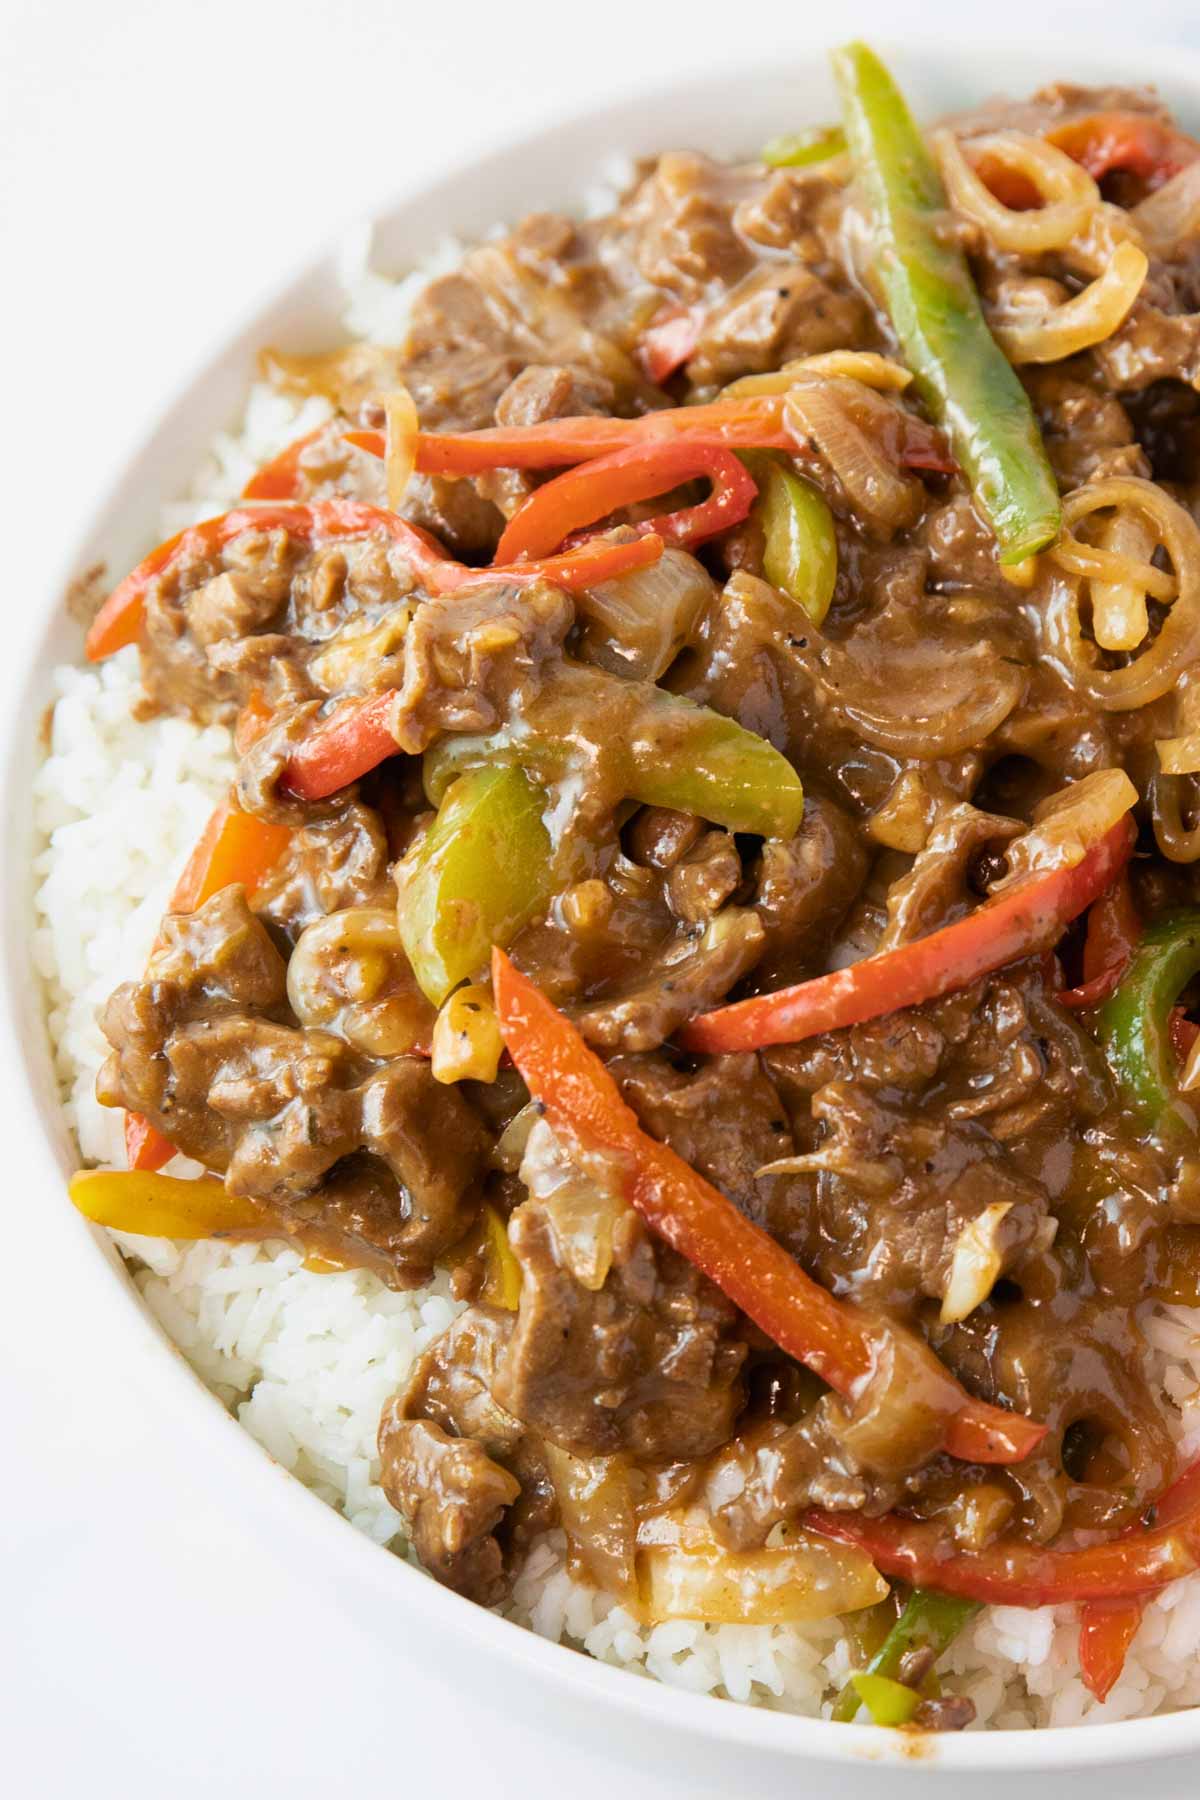 plate of pepper steak and onions over rice